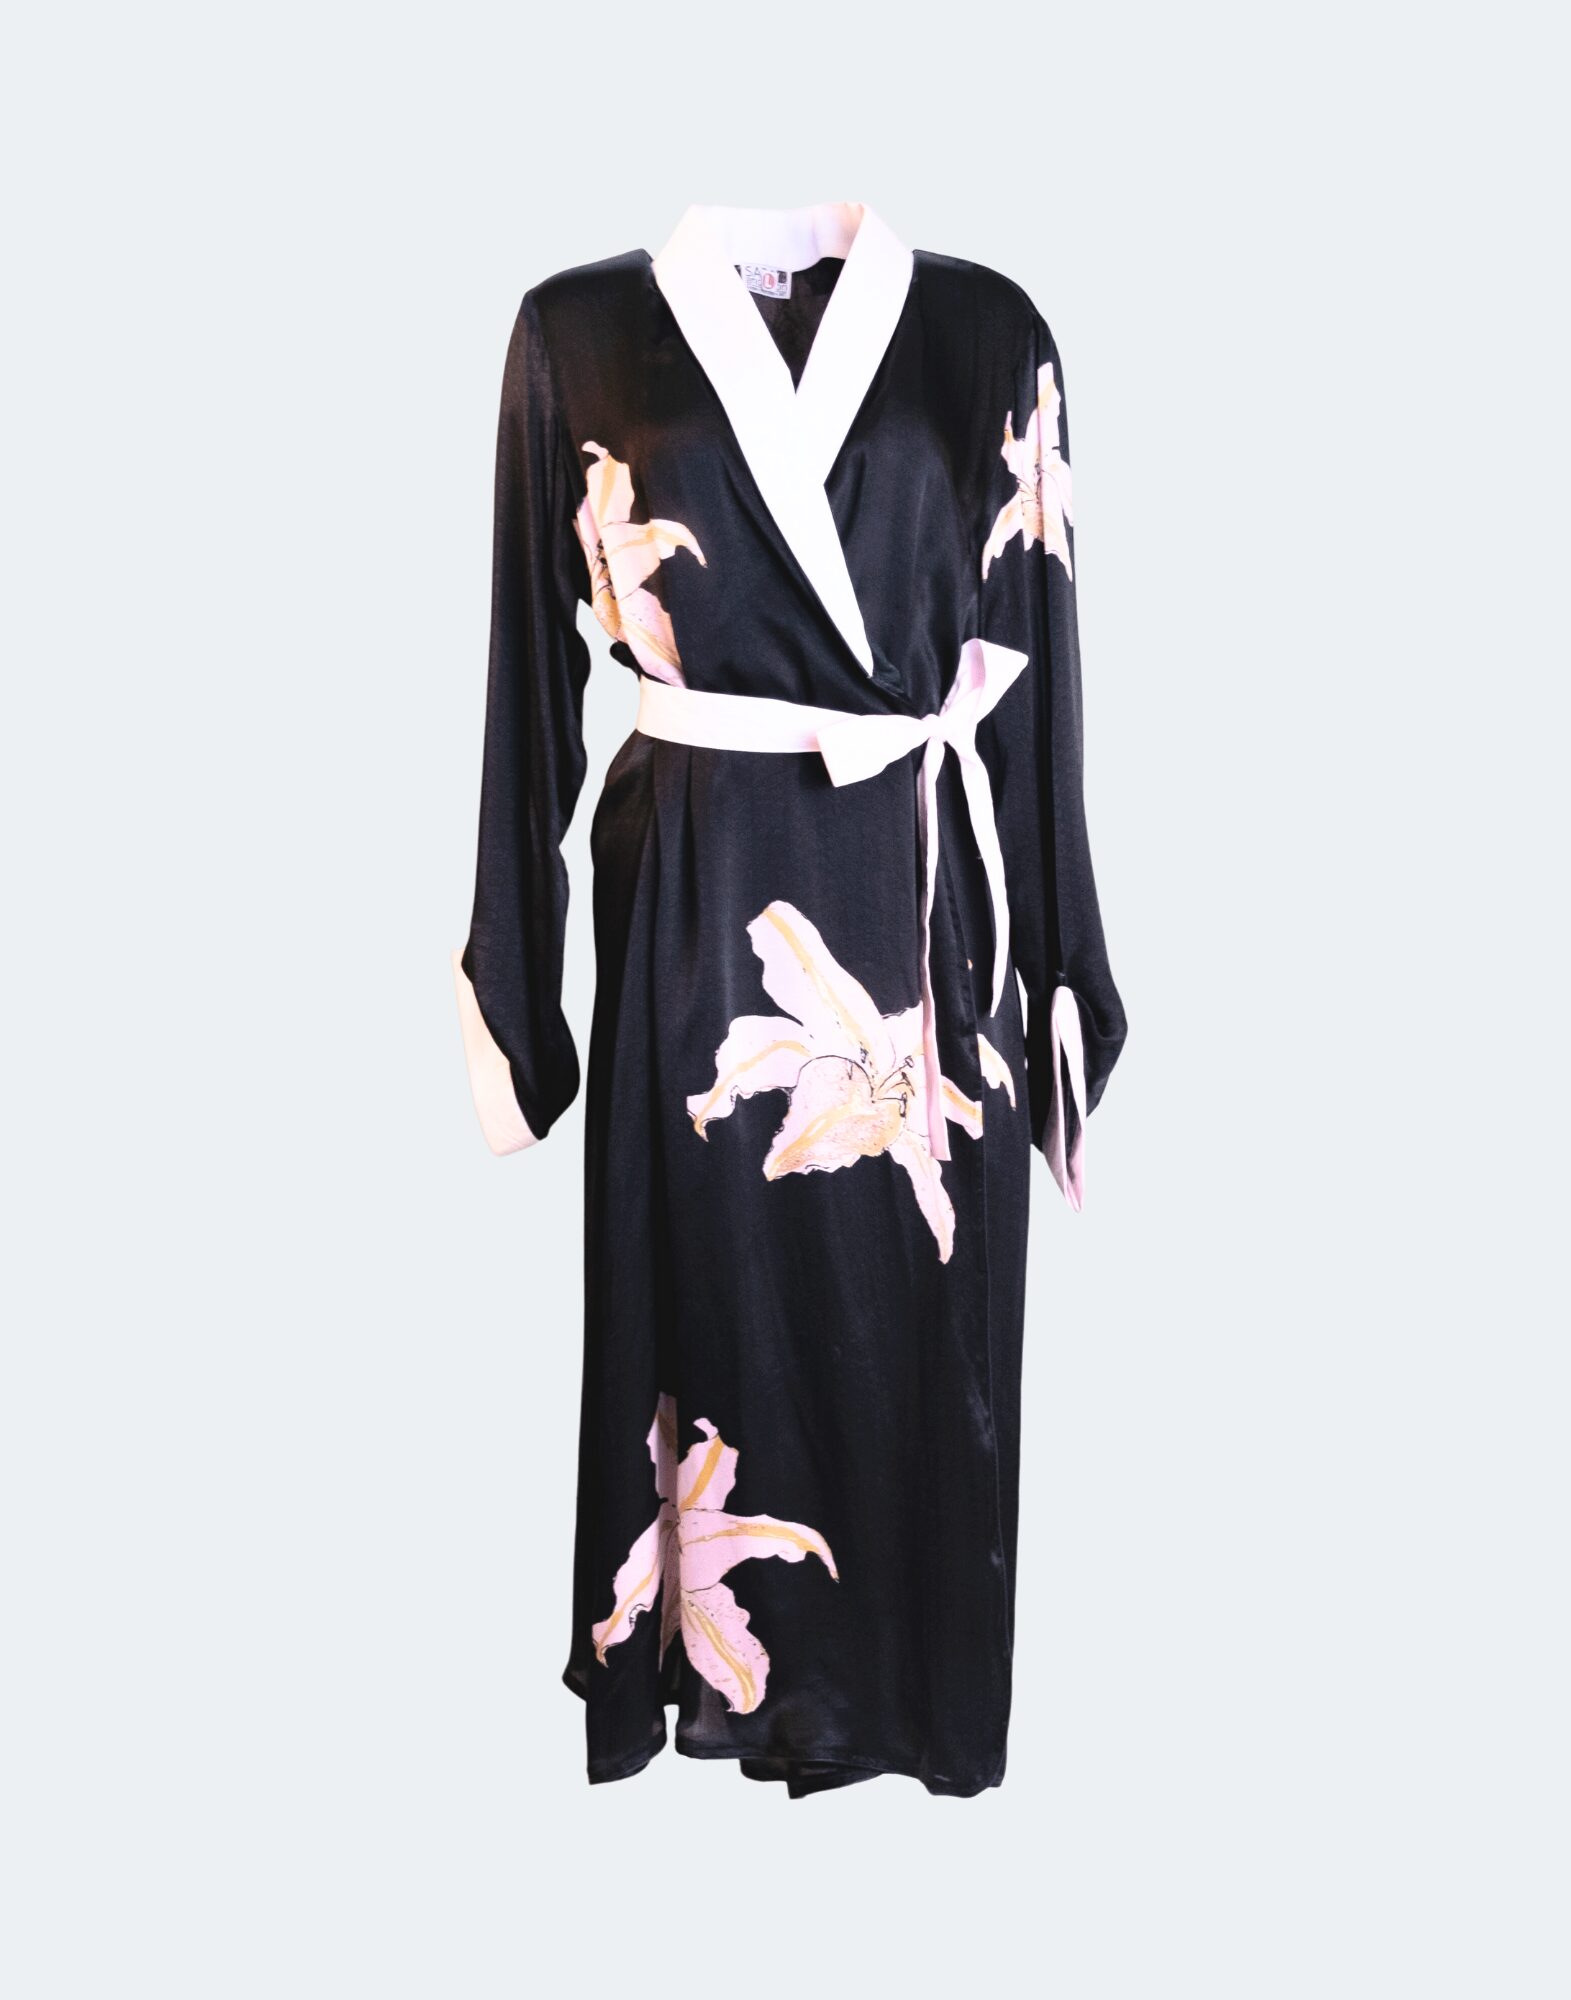 black patterned robe covered in pink lilies